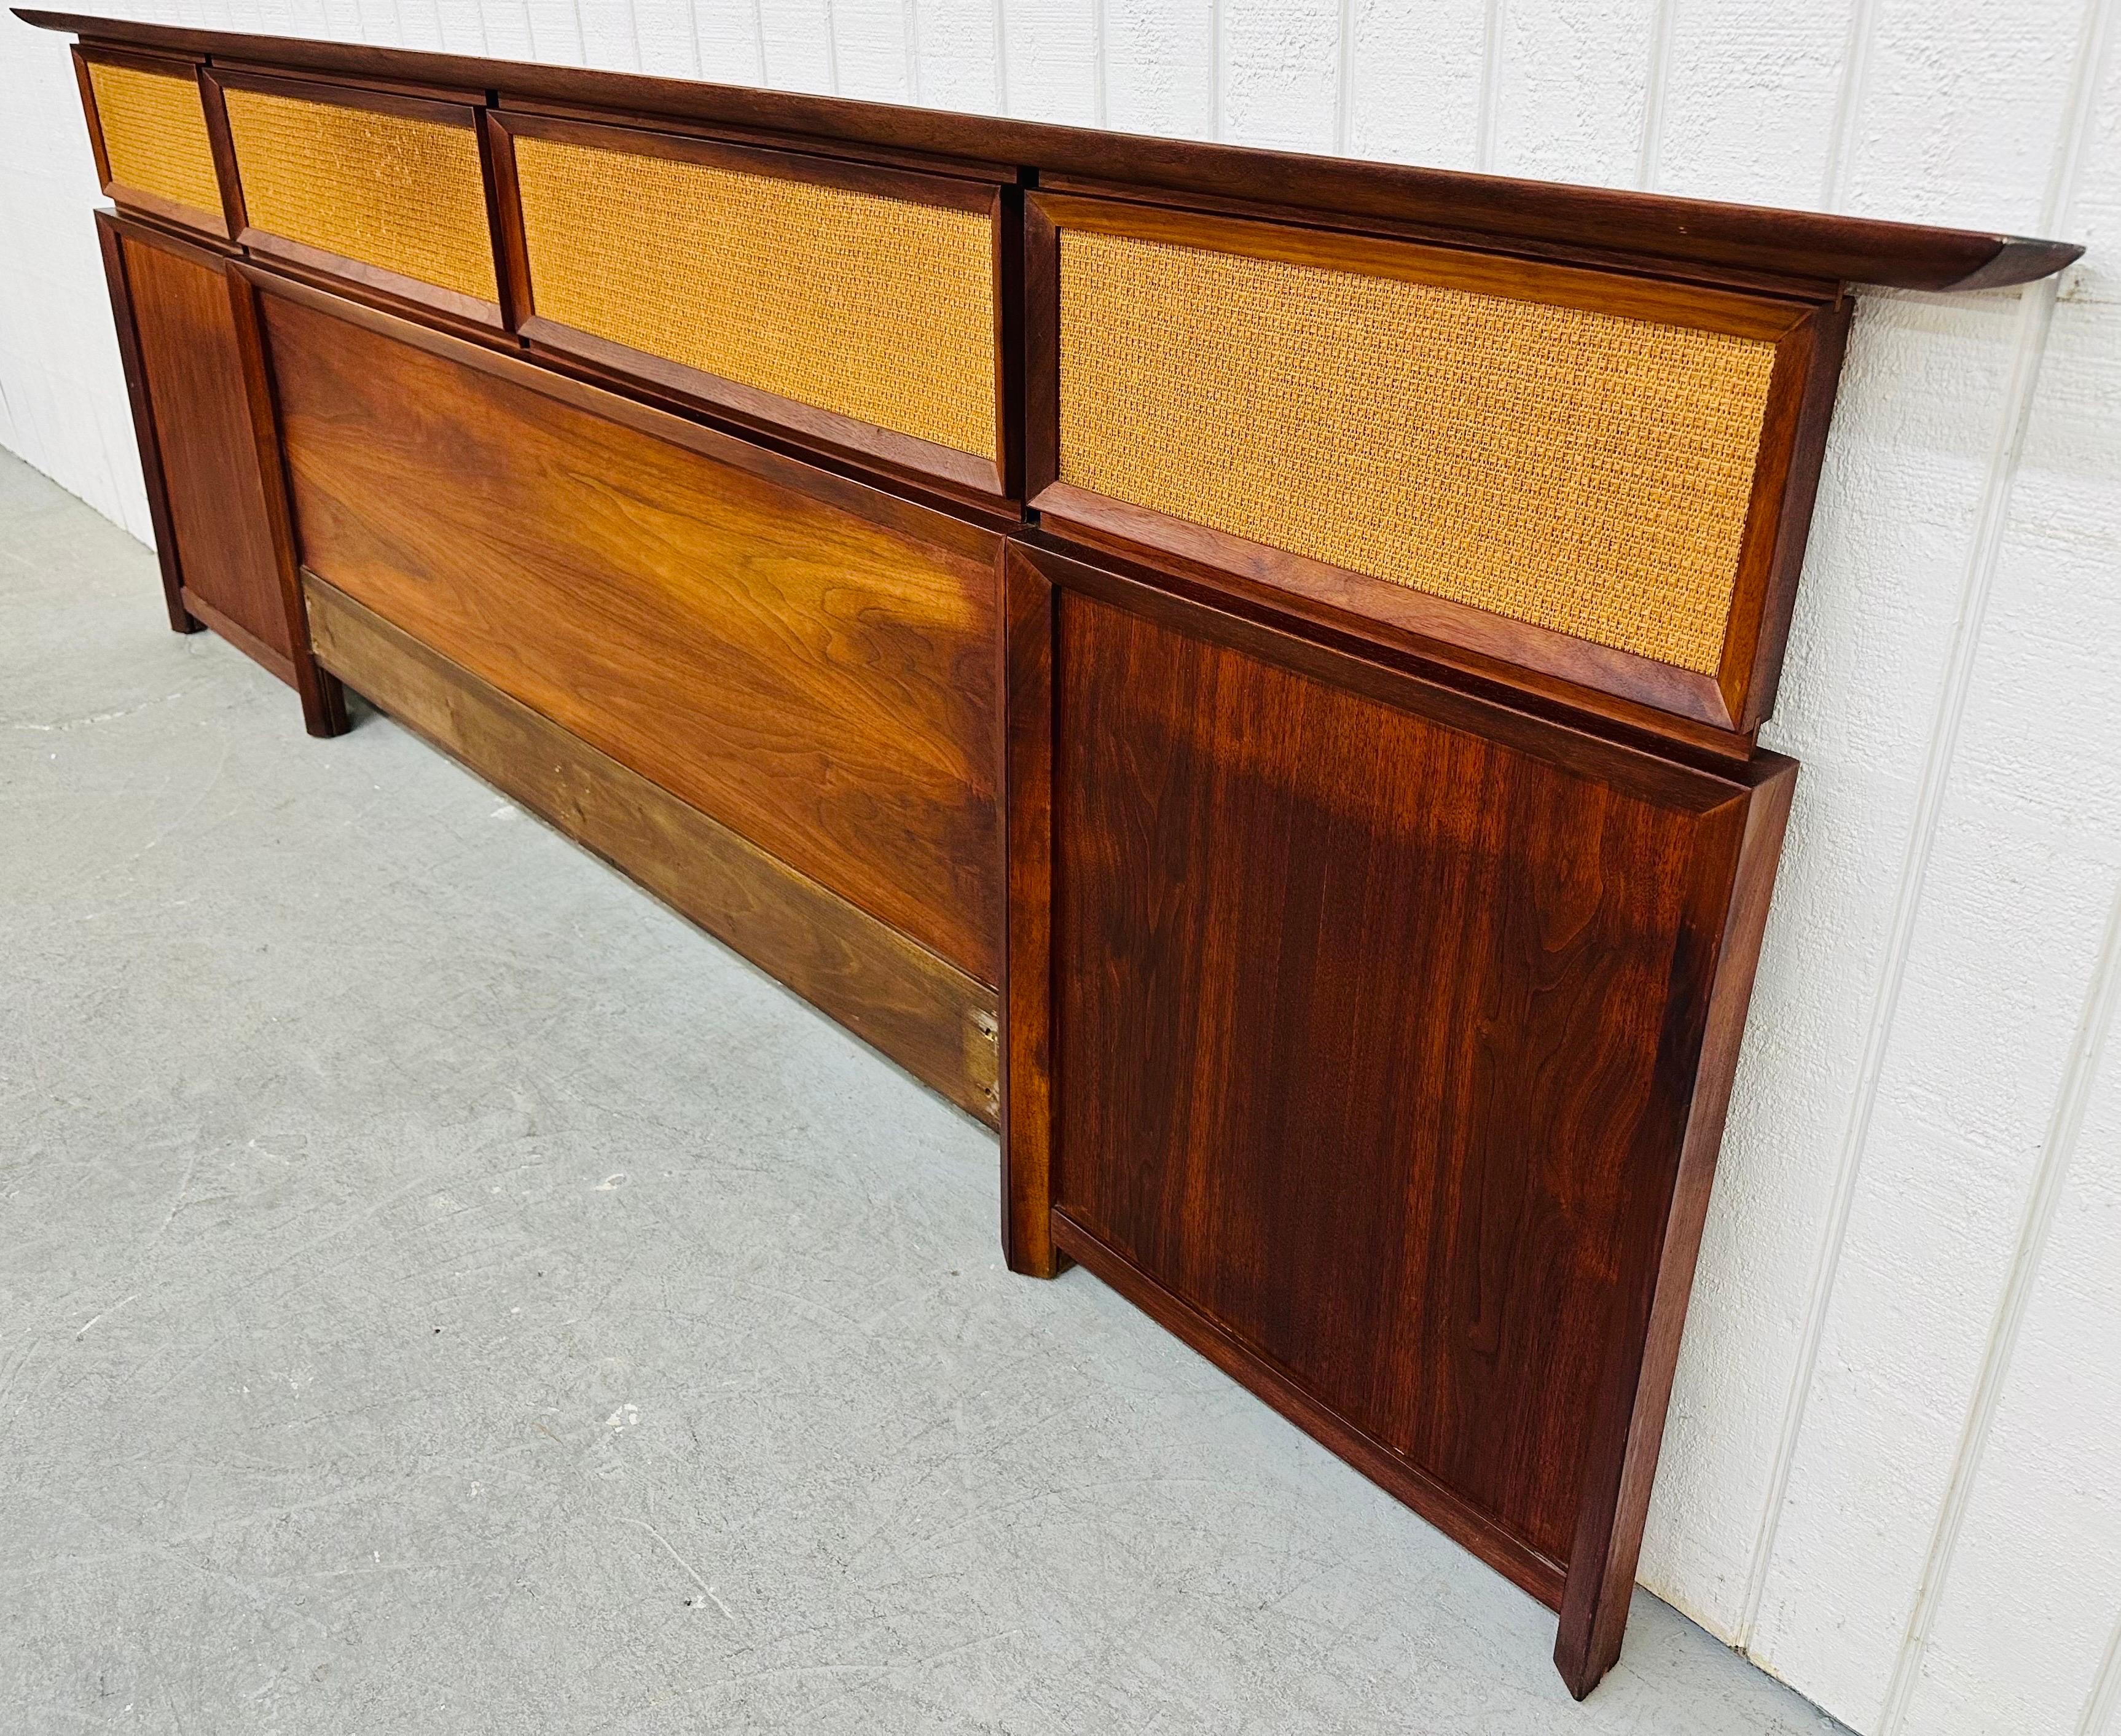 This listing is for a Mid-Century Modern Walnut & Cane King Size Headboard. Featuring a straight line design, walnut frame, four reversible cane panels, and a beautiful walnut finish. This is an exceptional combination of quality and design!